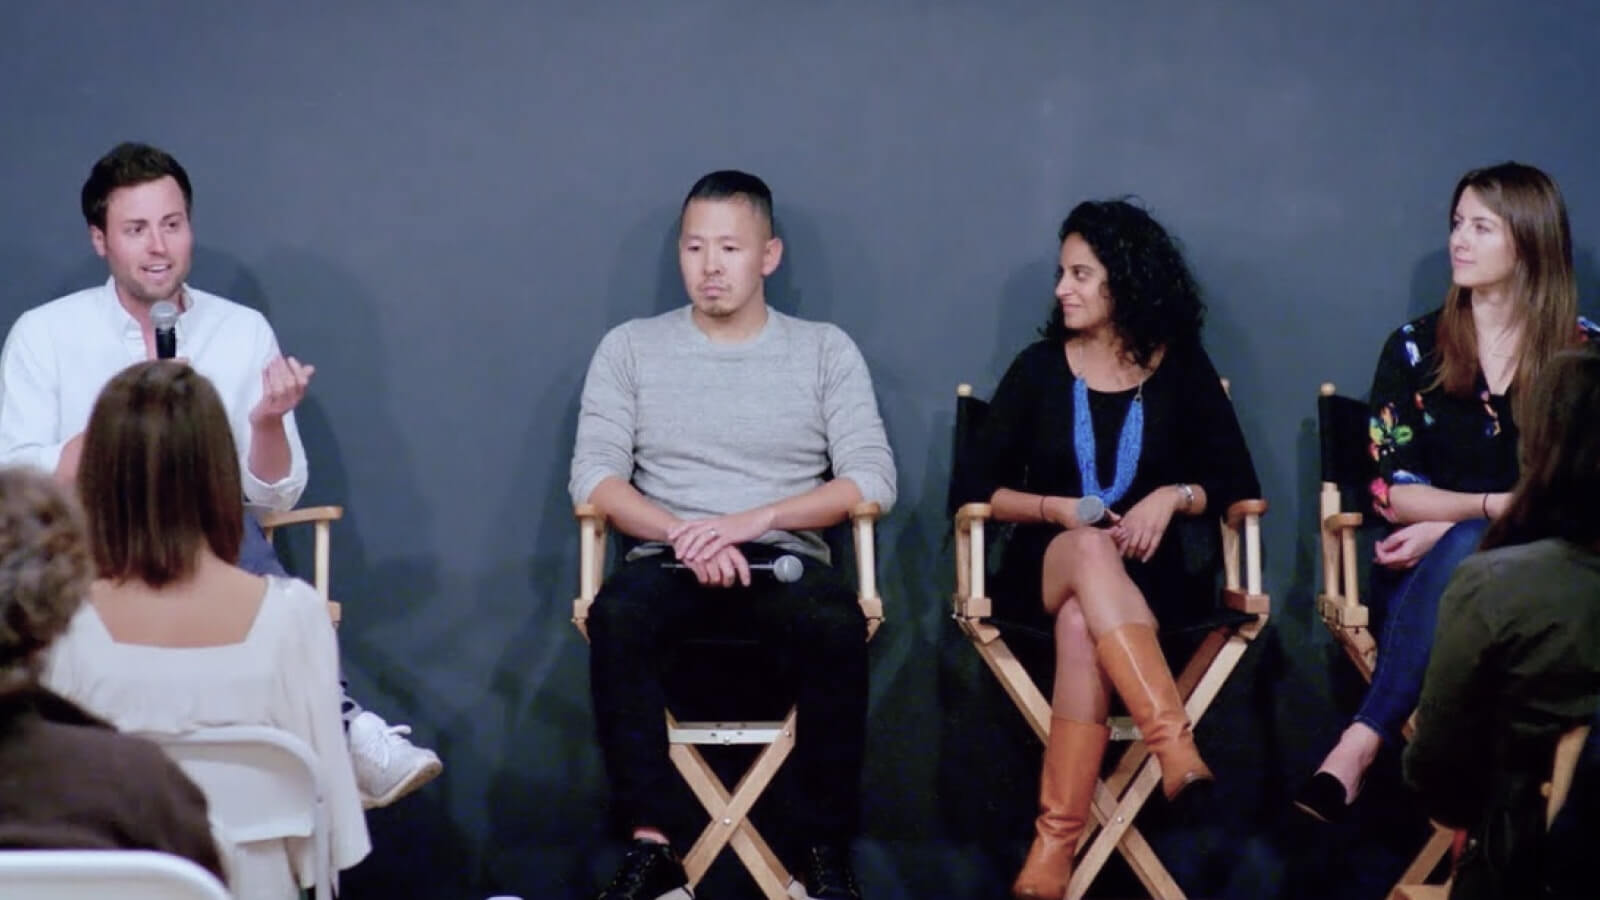 HR Leaders from Coinbase, Thumbtack & Reddit Discuss How to Retain Top Talent